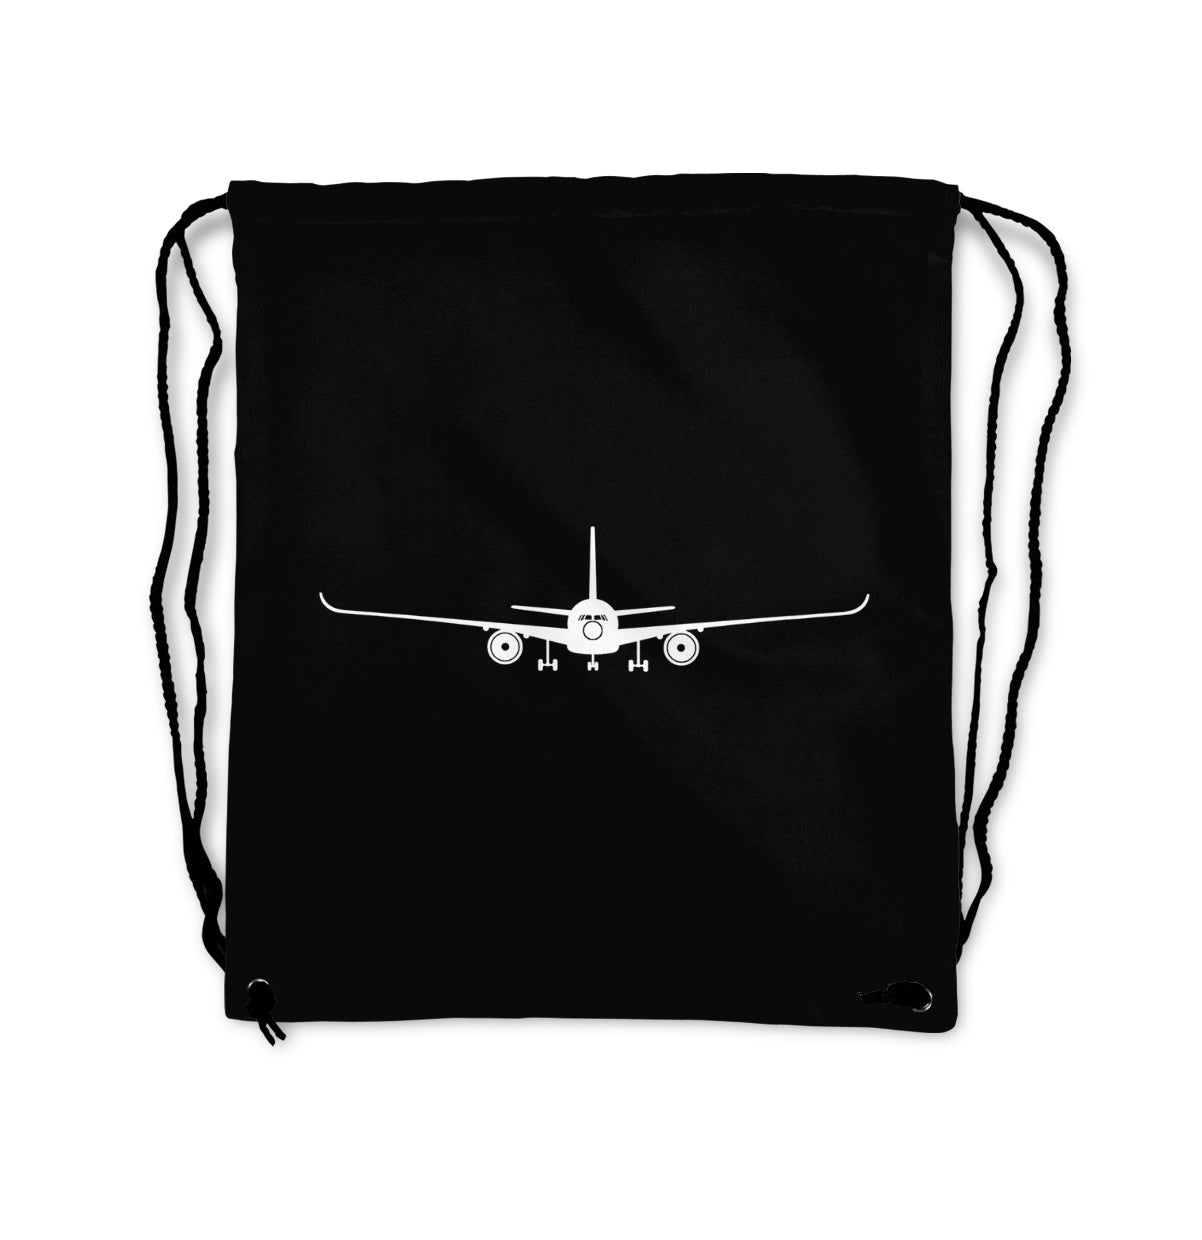 Airbus A350 Silhouette Designed Drawstring Bags